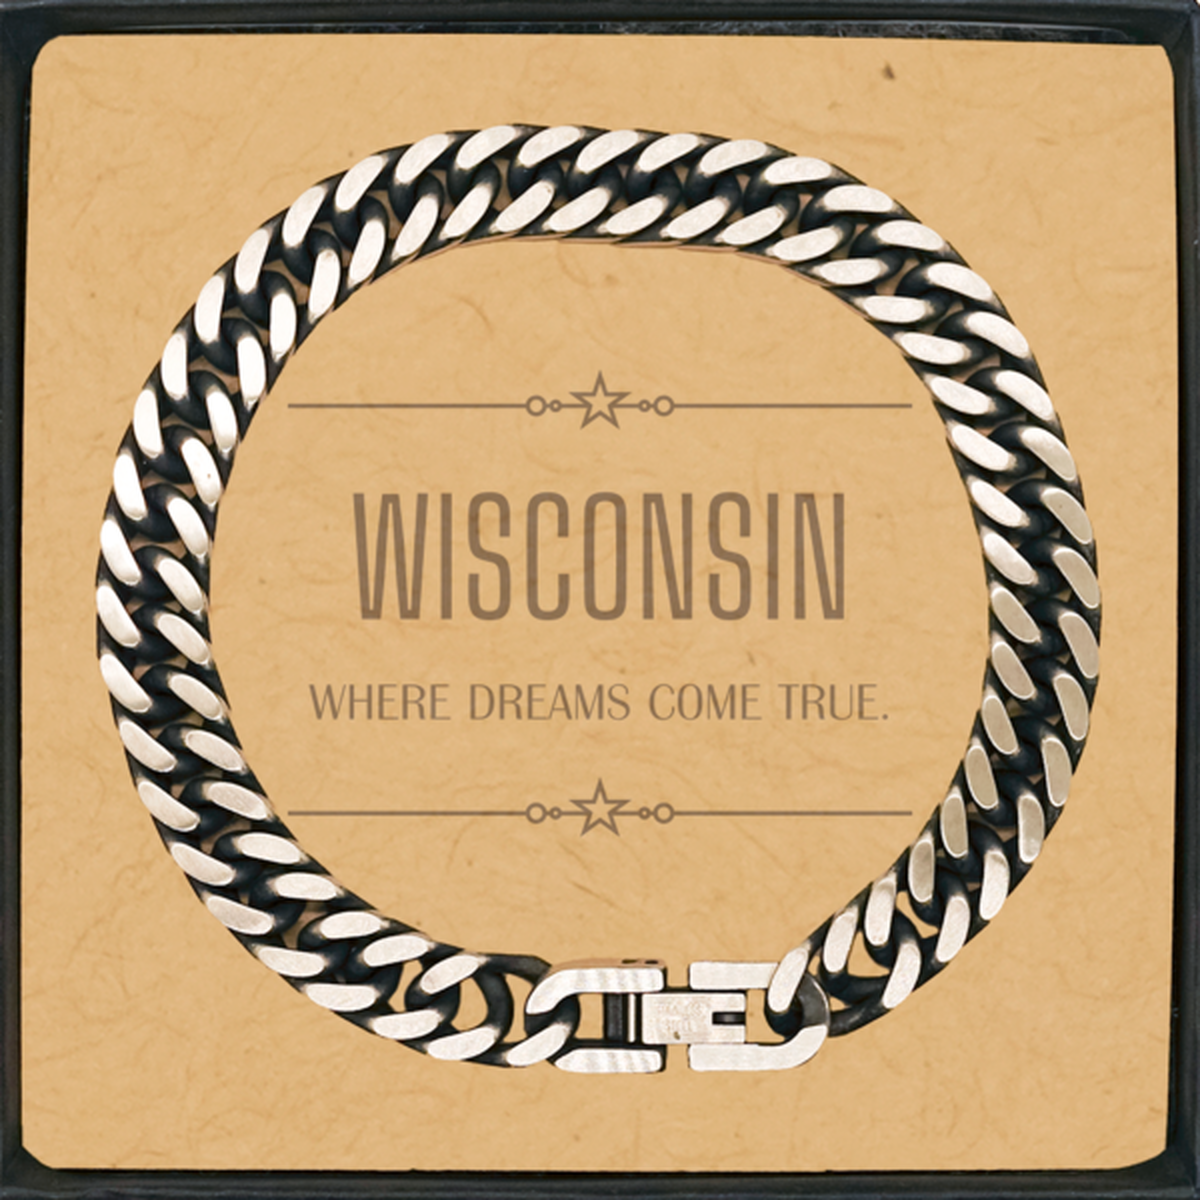 Love Wisconsin State Cuban Link Chain Bracelet, Wisconsin Where dreams come true, Birthday Inspirational Gifts For Wisconsin Men, Women, Friends